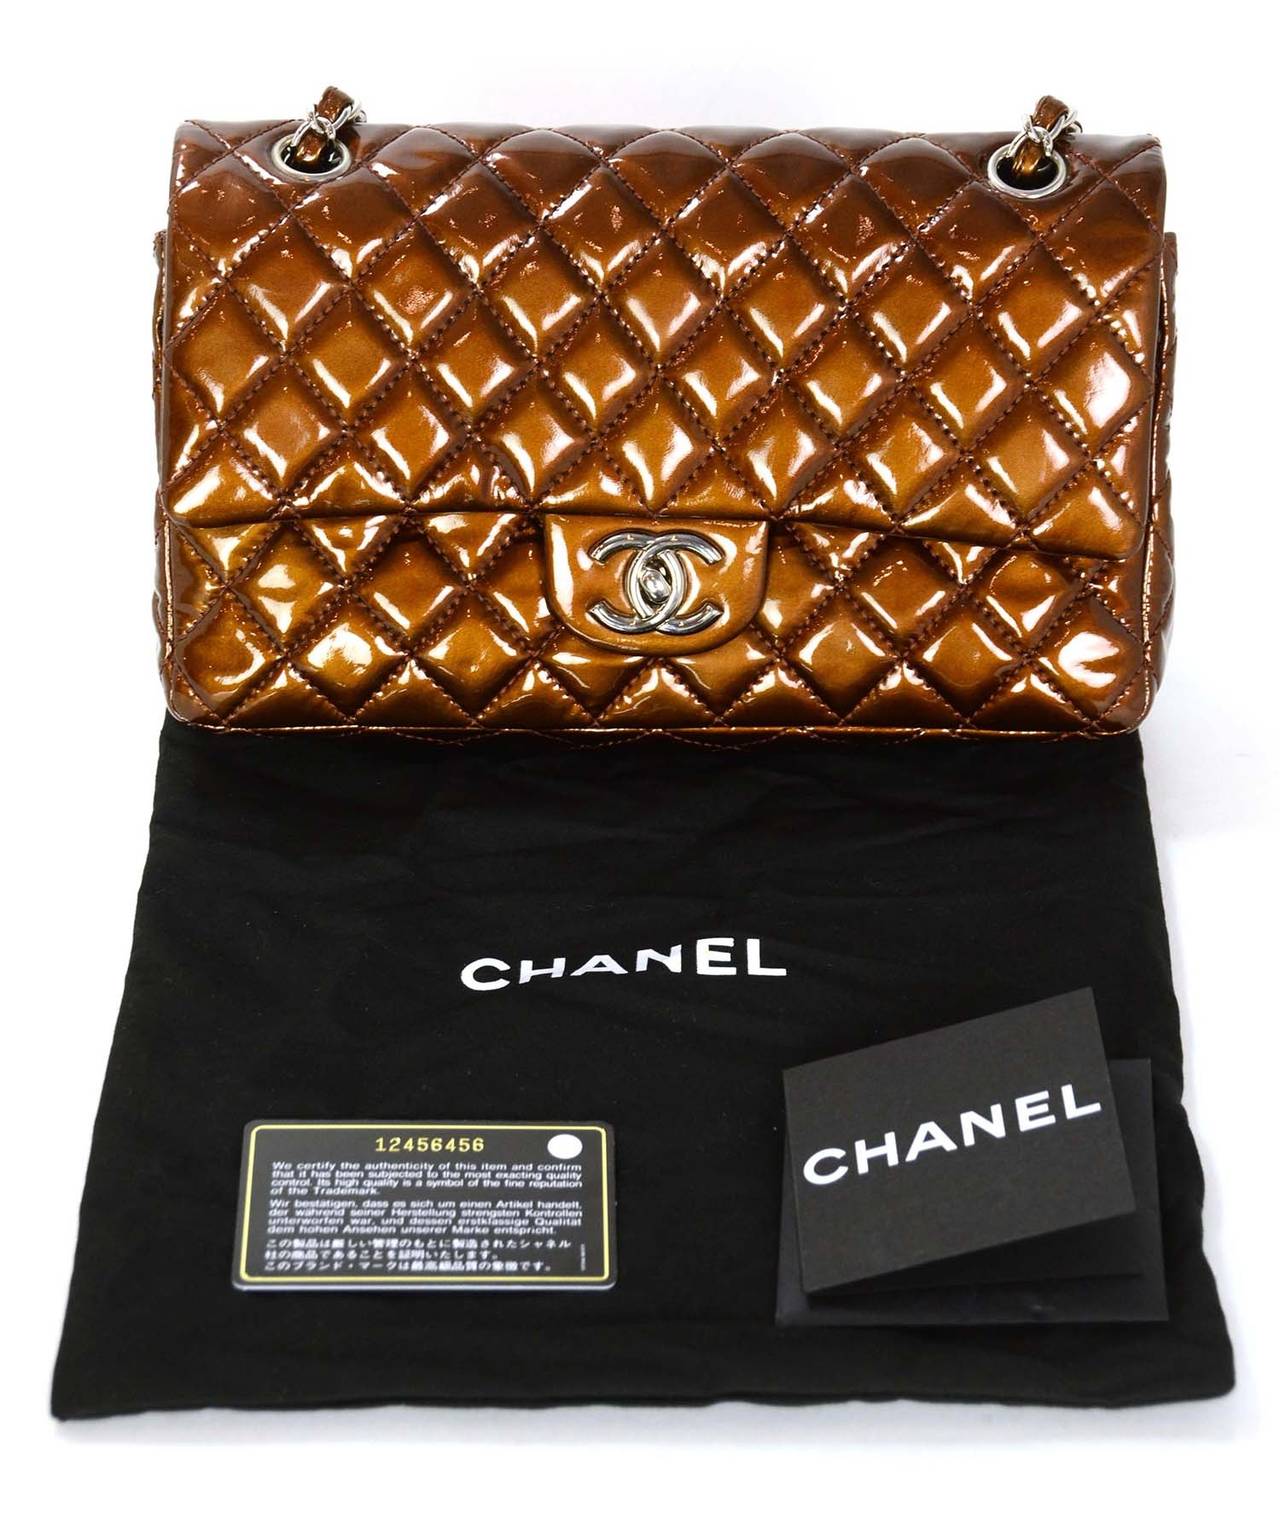 CHANEL 2009 Bronze Patent Leather Quilted Classic Madium Flap Bag 5